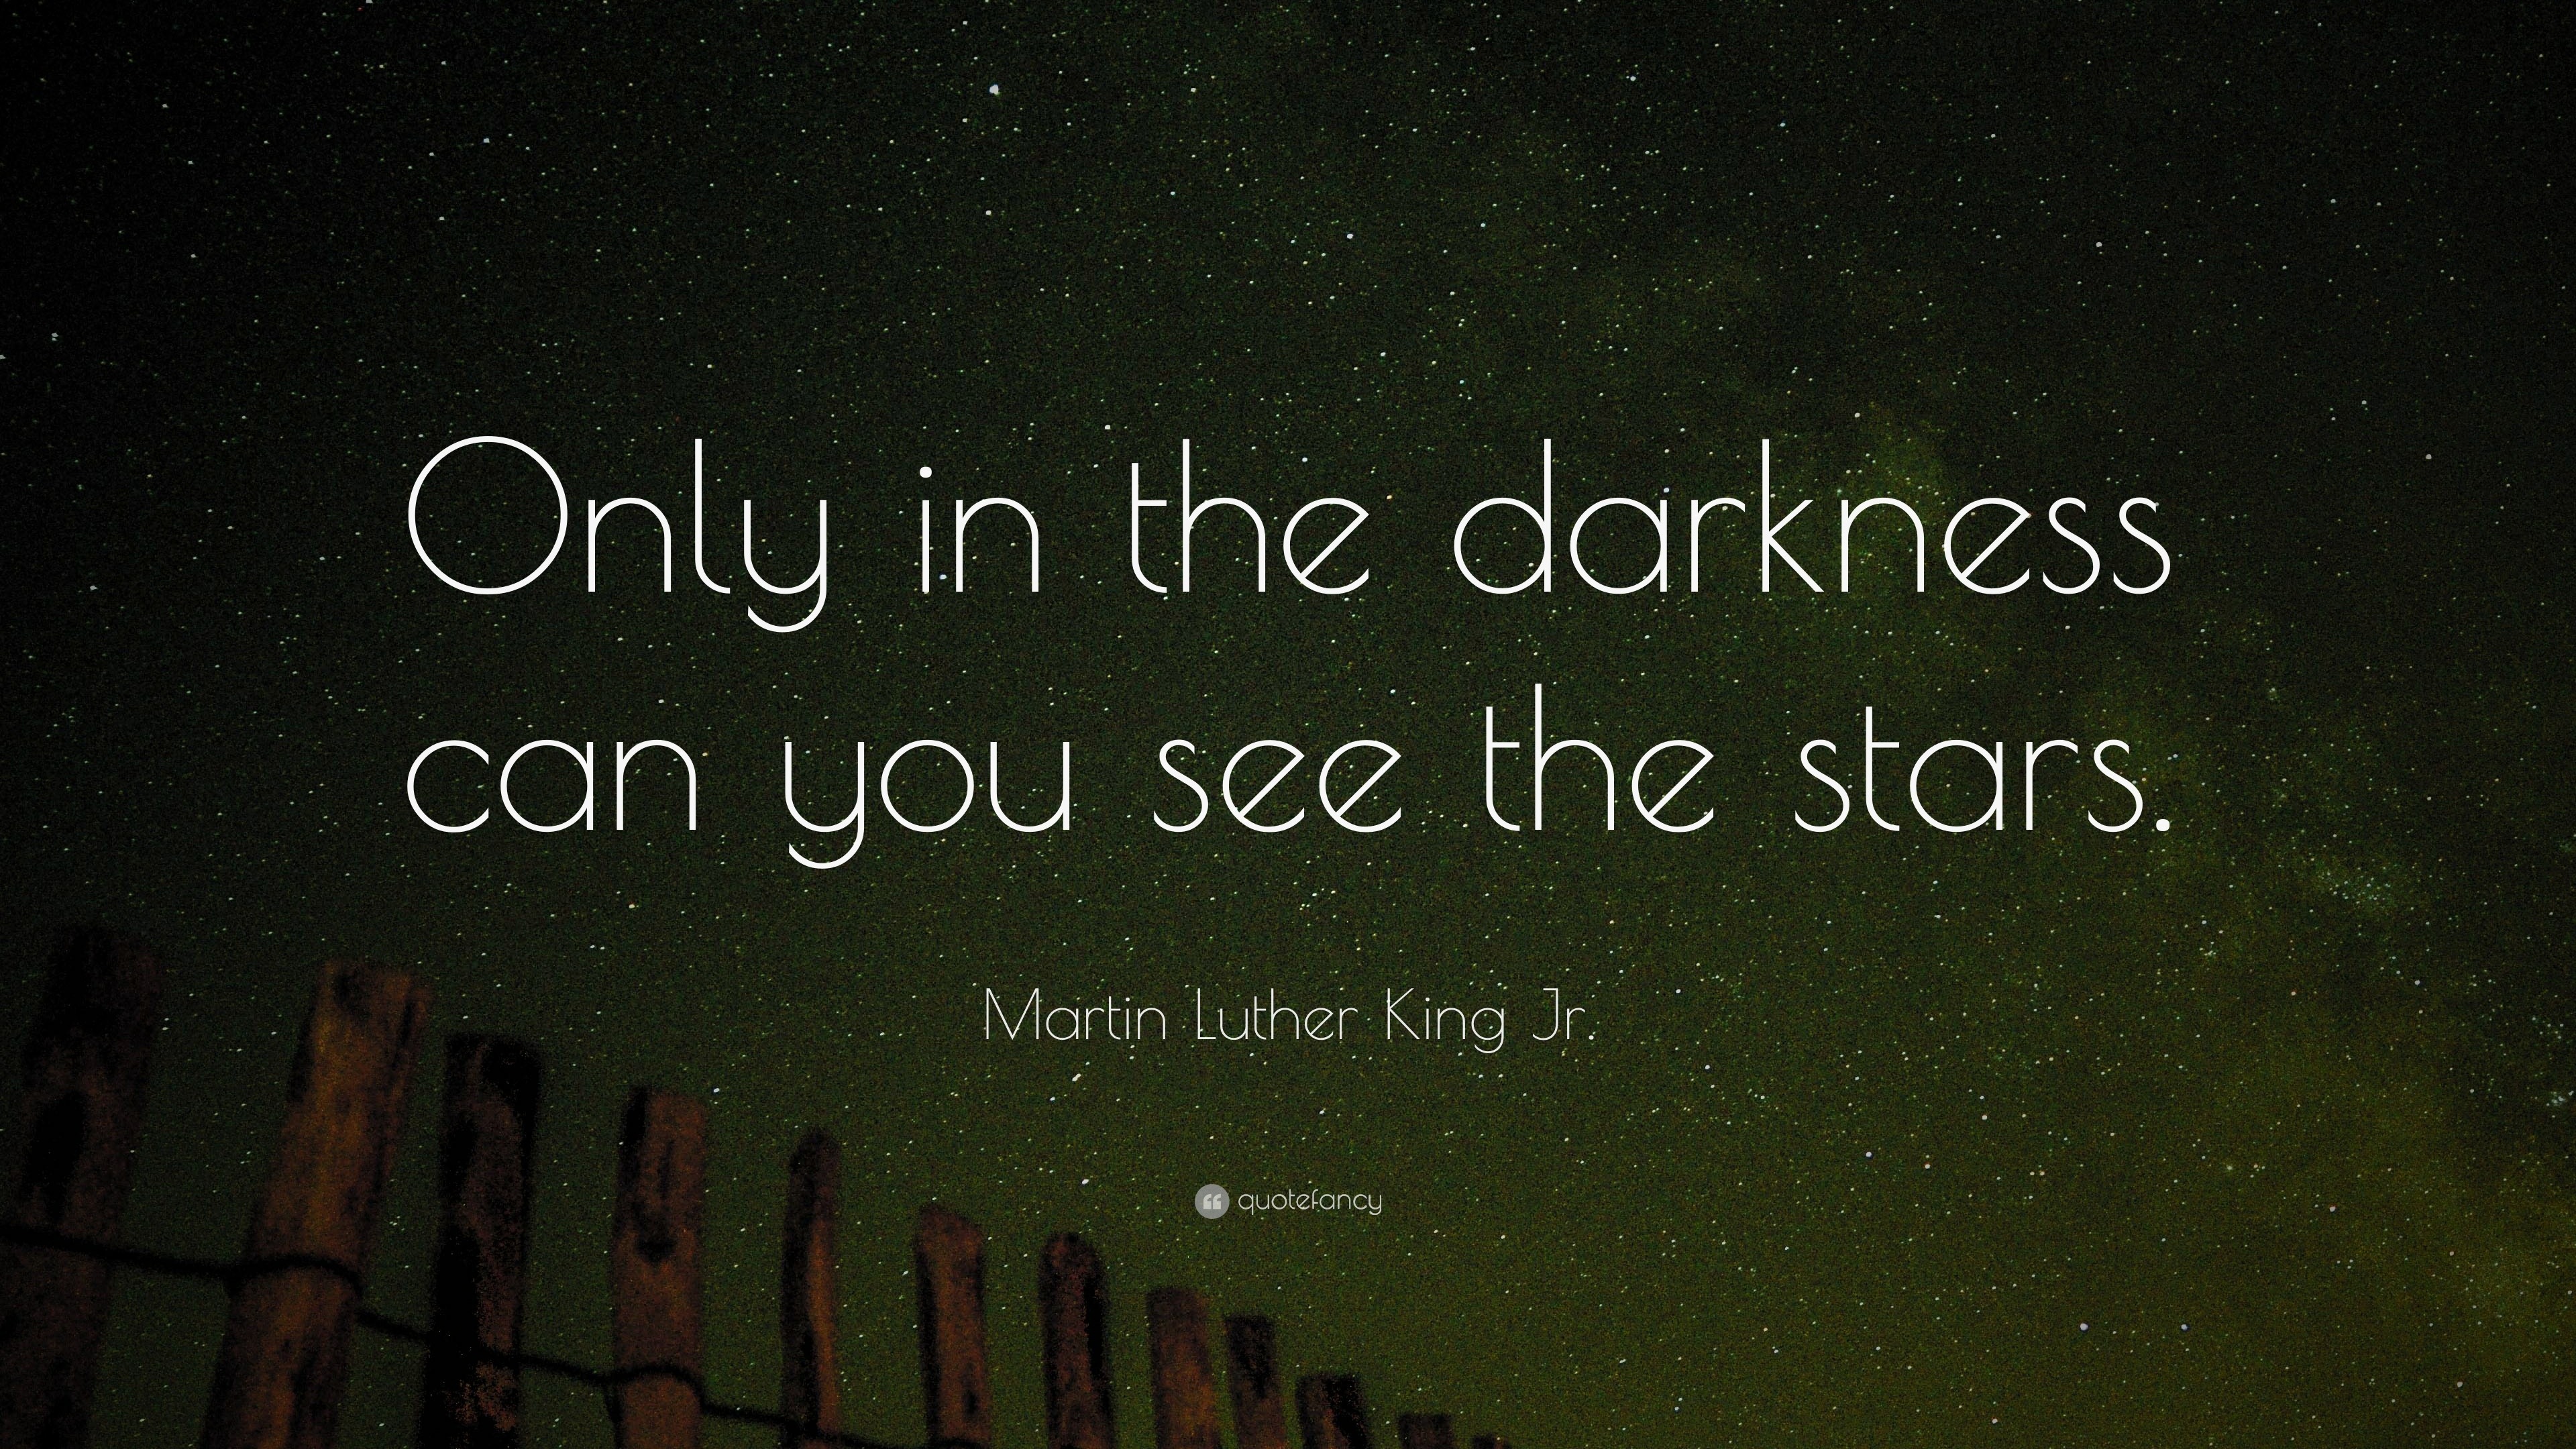 Martin Luther King Jr. Quote: “Only in the darkness can you see the ...